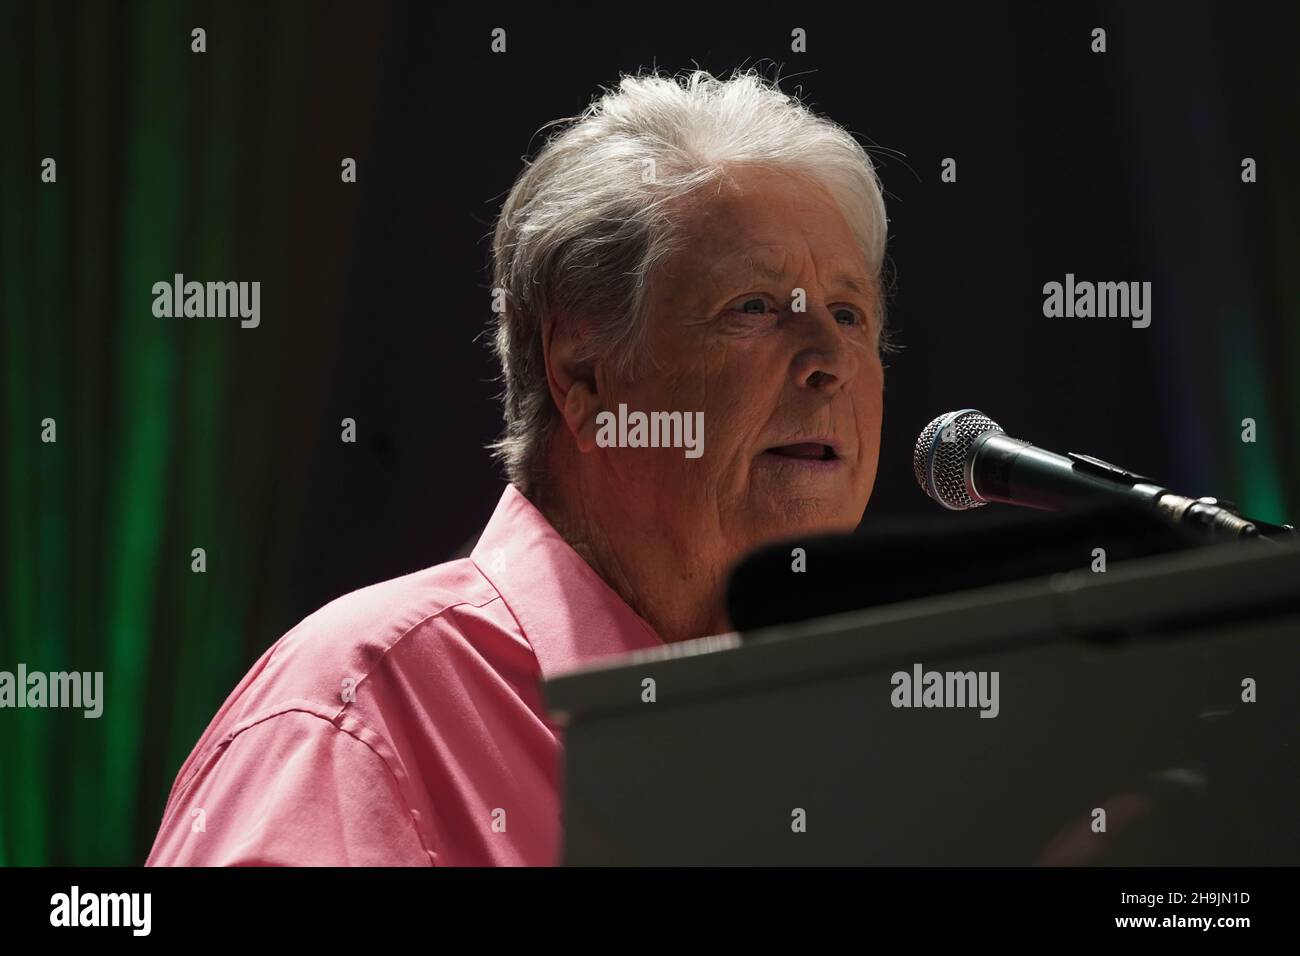 Brian Wilson performing live on stage at Hammersmith Eventim in London as part of the celebration of the 50th anniversary of the Beach Boys' album Pet Sounds. Photo date: Tuesday, August 1, 2017. Photo credit should read: Richard Gray/EMPICS Entertainment Stock Photo